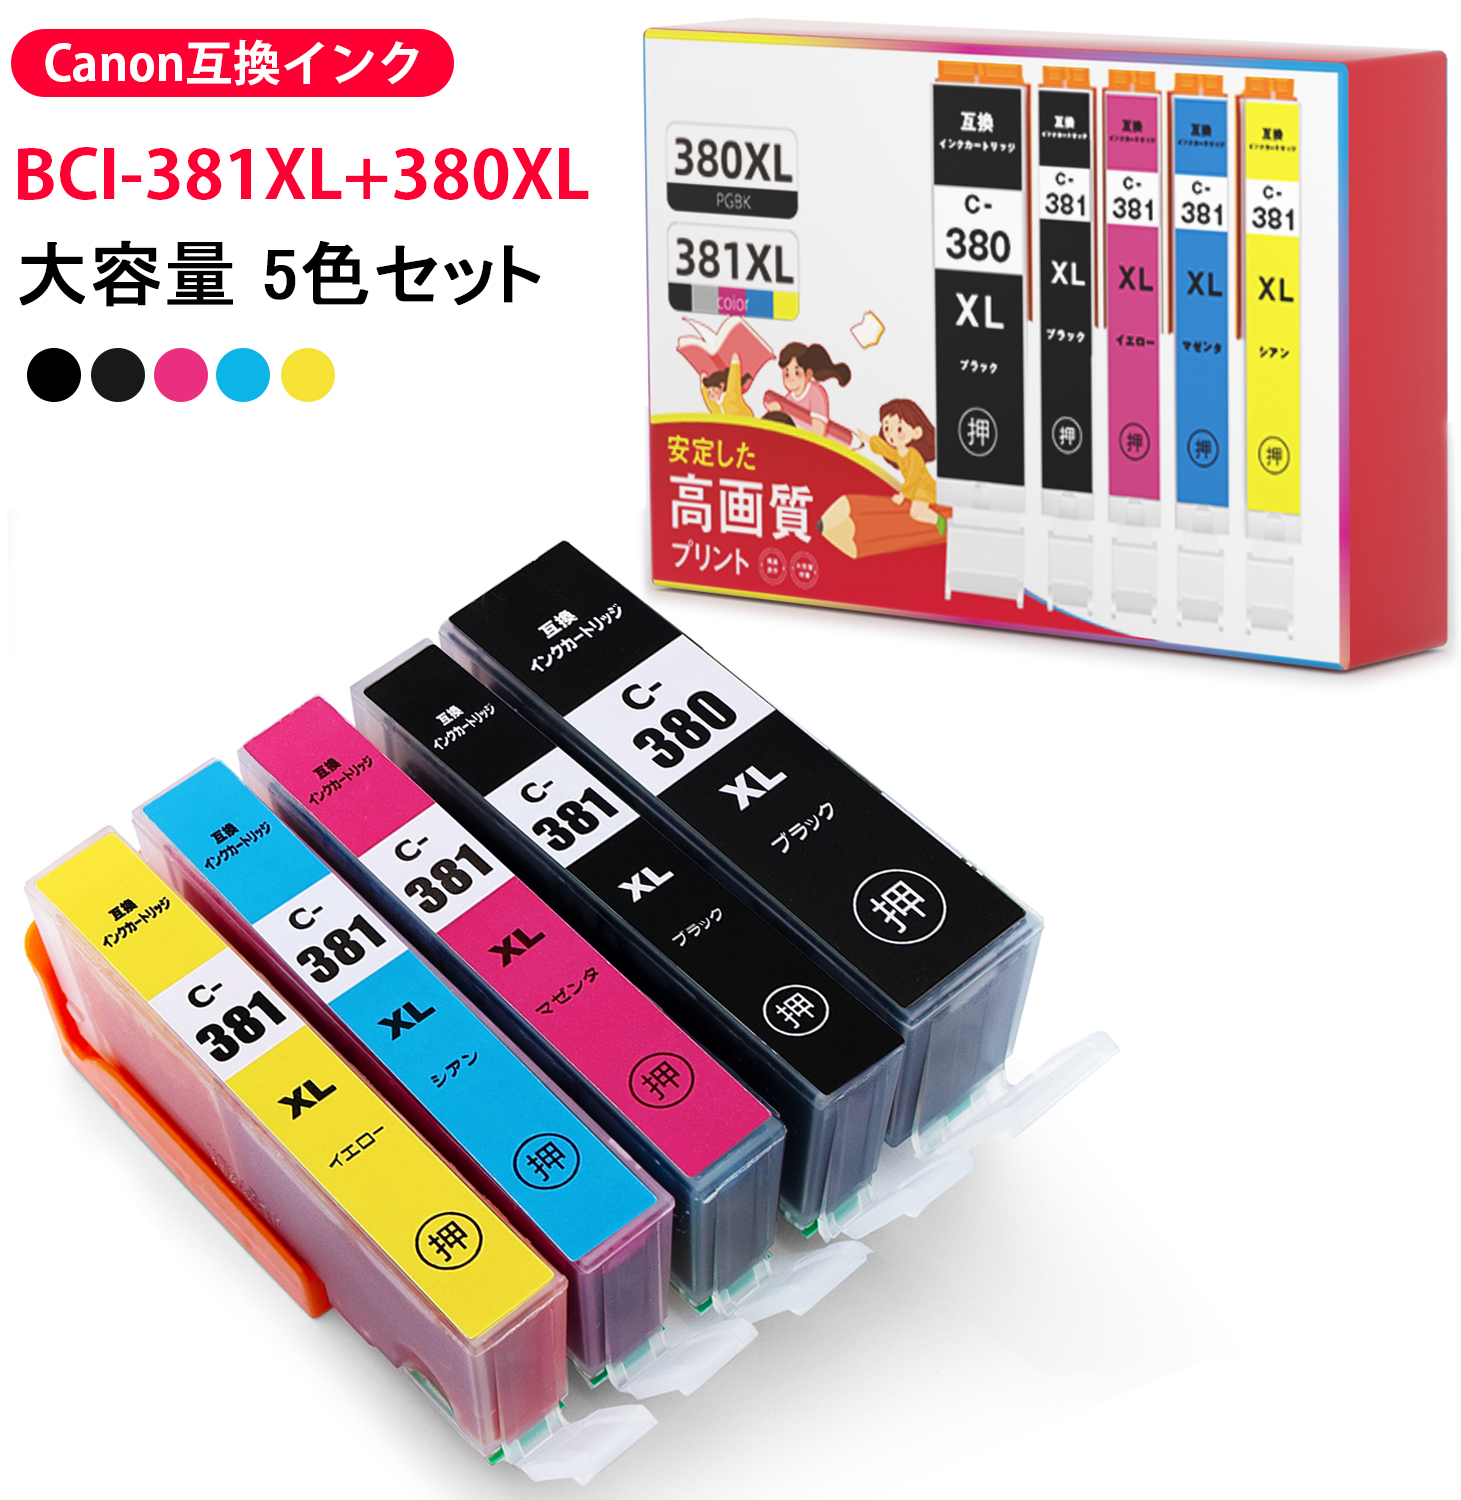 BCI-381XL BCI-380XL 互換 インクカートリッジ 5色セット キヤノン(Canon)専用補充インク 残量表示機能 個包装  TS8430 TS8330 TS8230 対応｜doshoinjapan